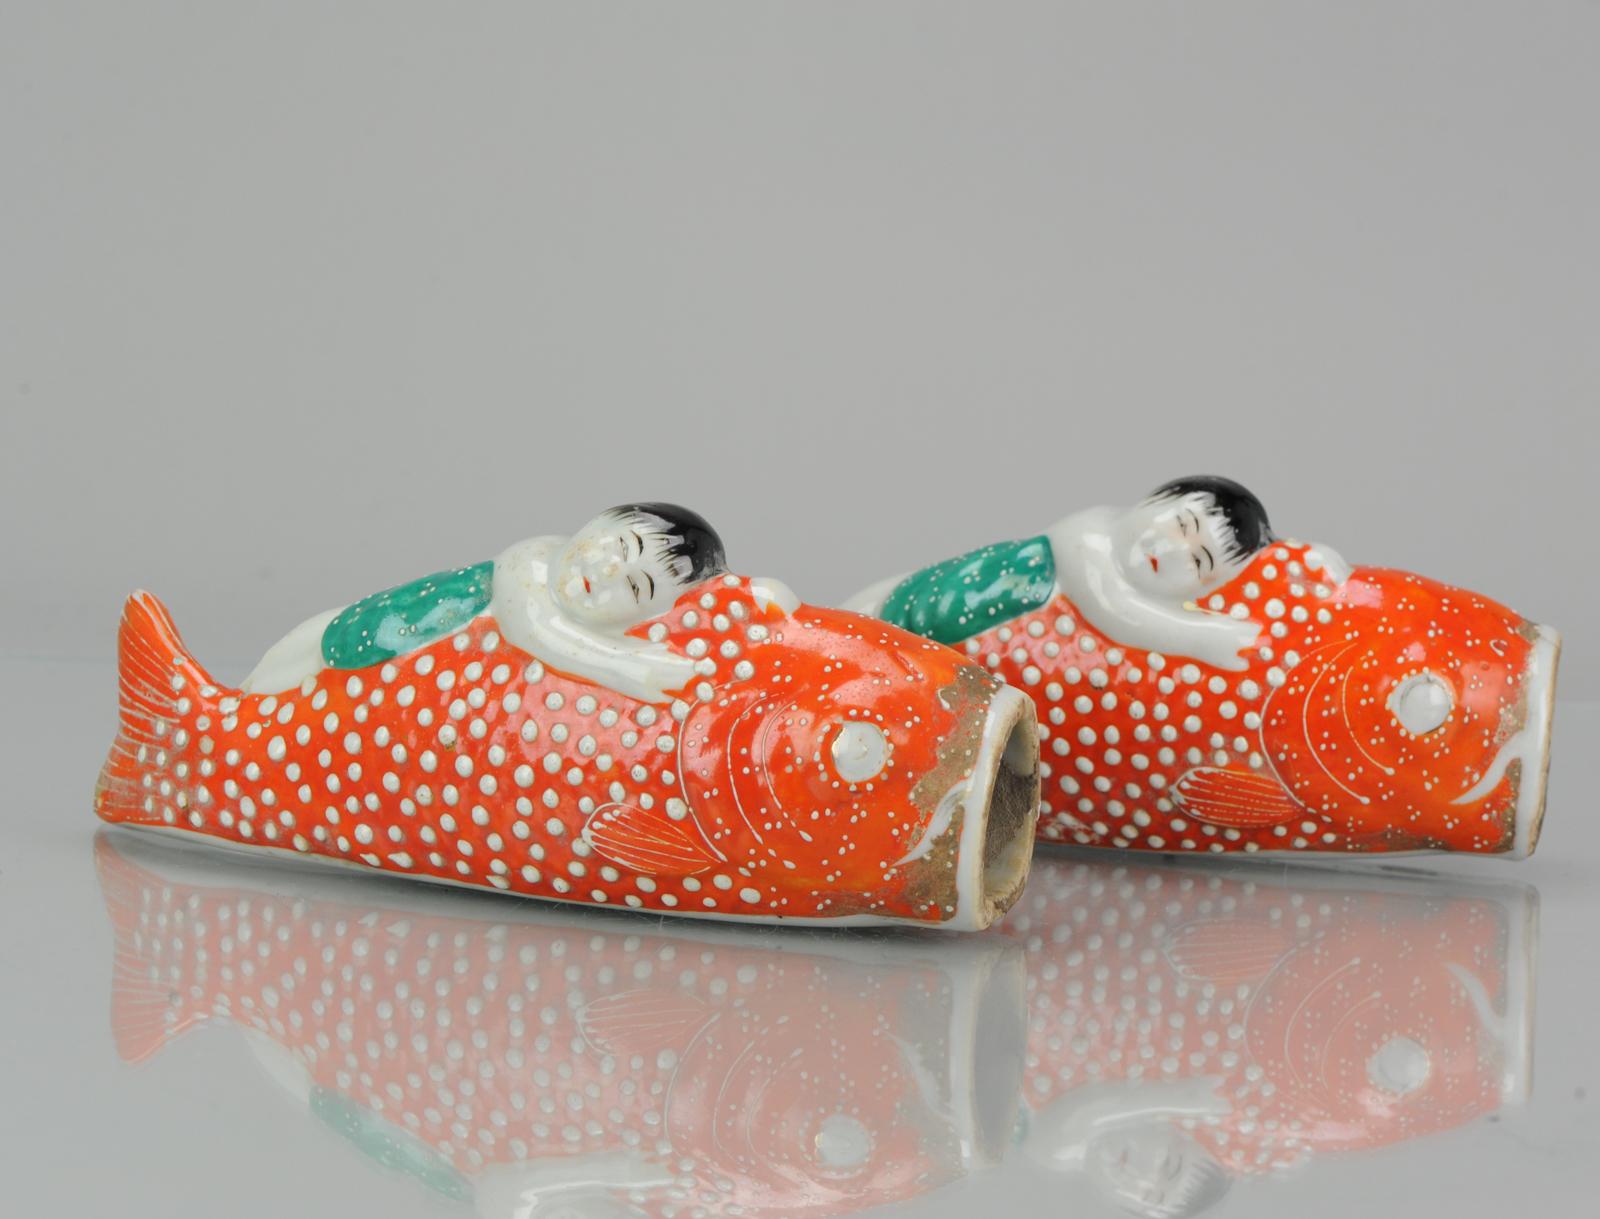 A very nice pair of wall pocket vases in the shape of Koi Carps with figures lying on their backs and seem to be transported.

Each wall vase has been manufactured from fine porcelain and hand painted in vibrant shades of orange, green, white and